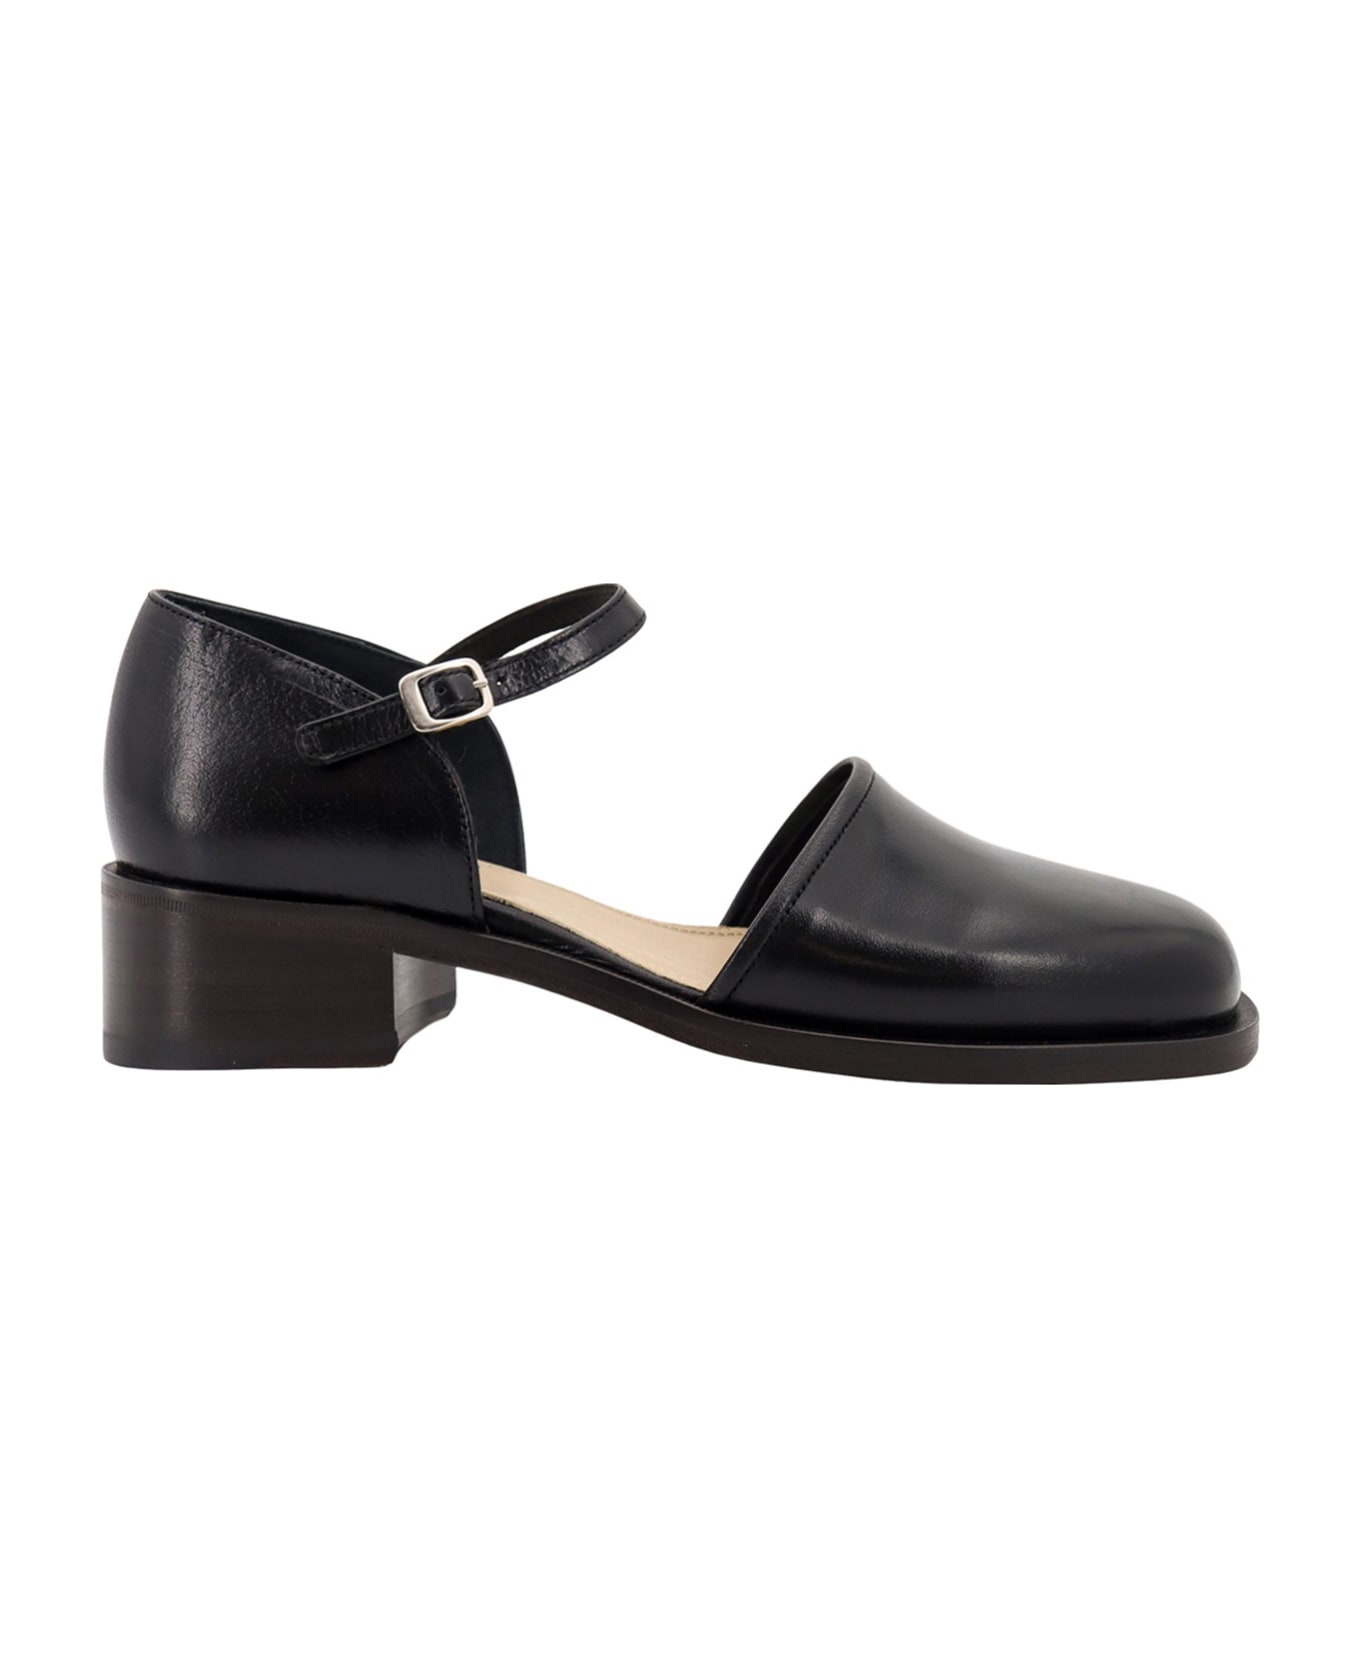 Lemaire Mary Jane Sandals - Black